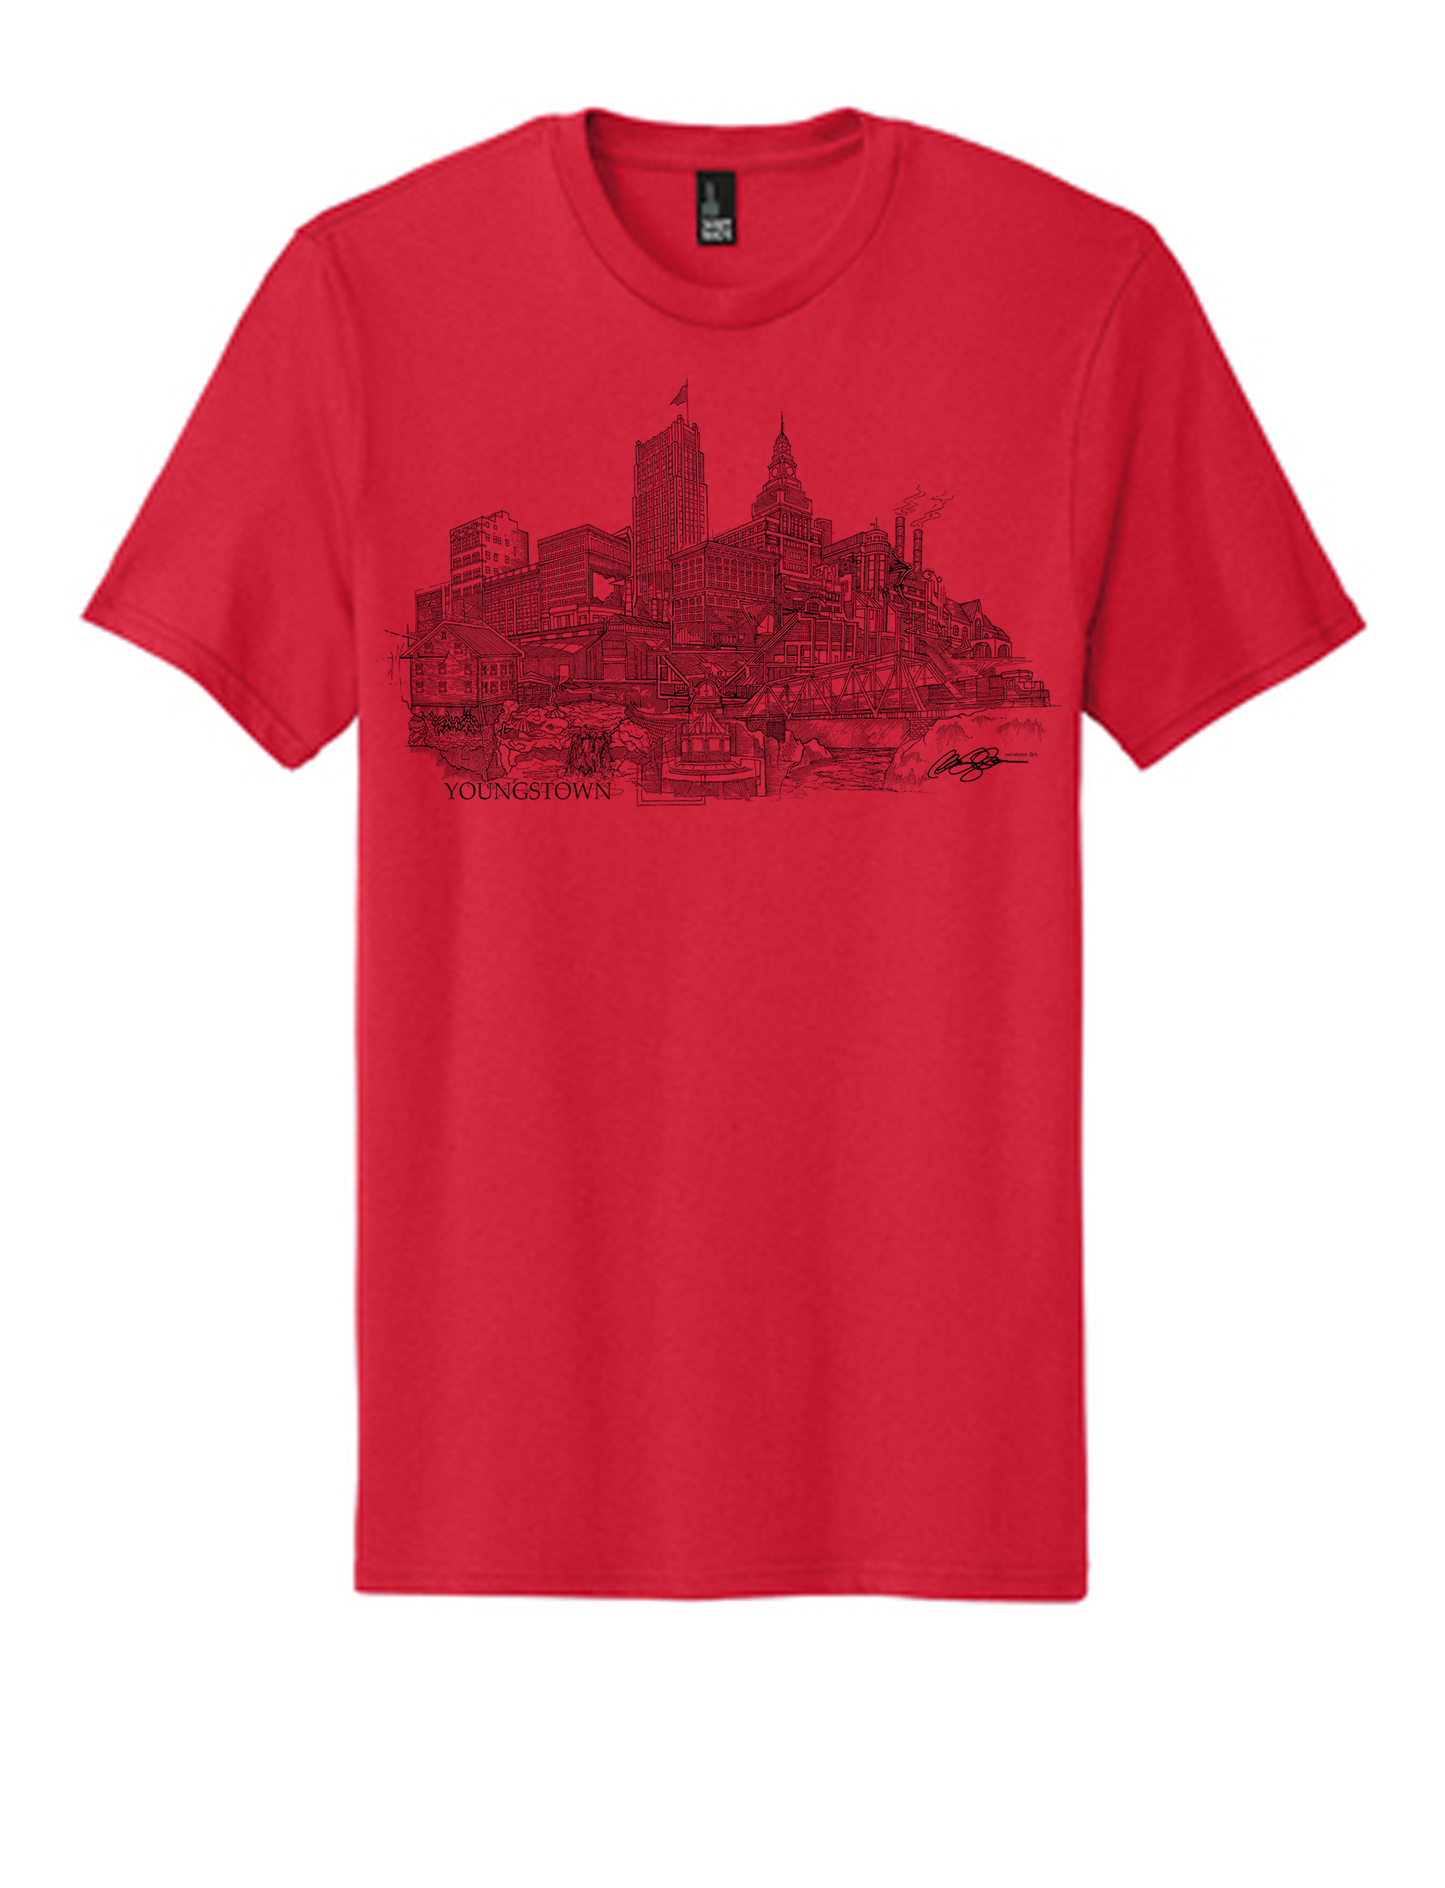 Youngstown T-Shirt Silver